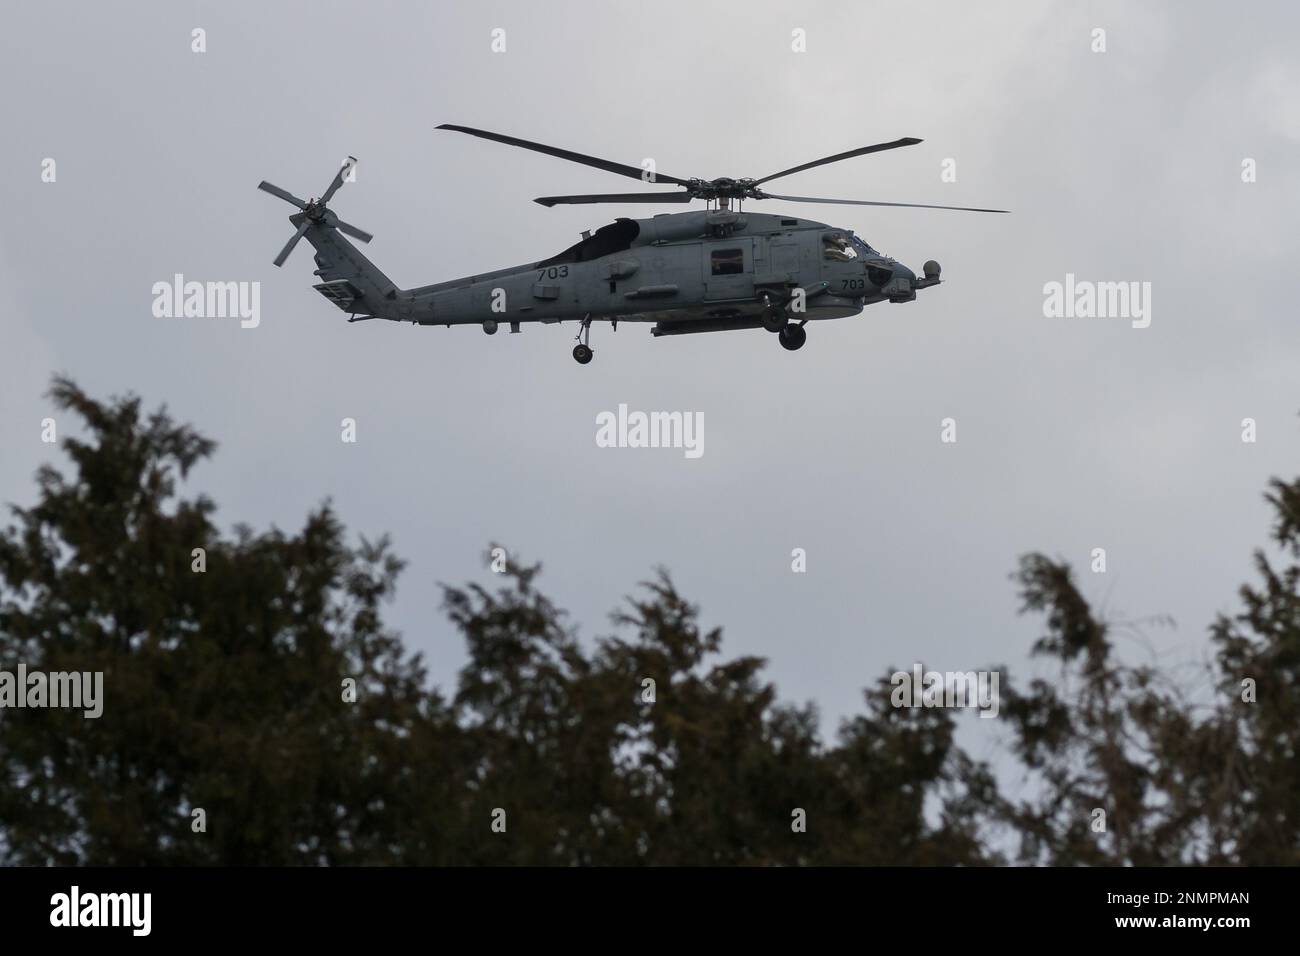 A Sikorsky SH-60 Seahawk helicopter with the US Navy Helicopter Maritime Strike Squadron (HSM-51, known as the War Lord) flying near NAF Atsugi, Japan Stock Photo